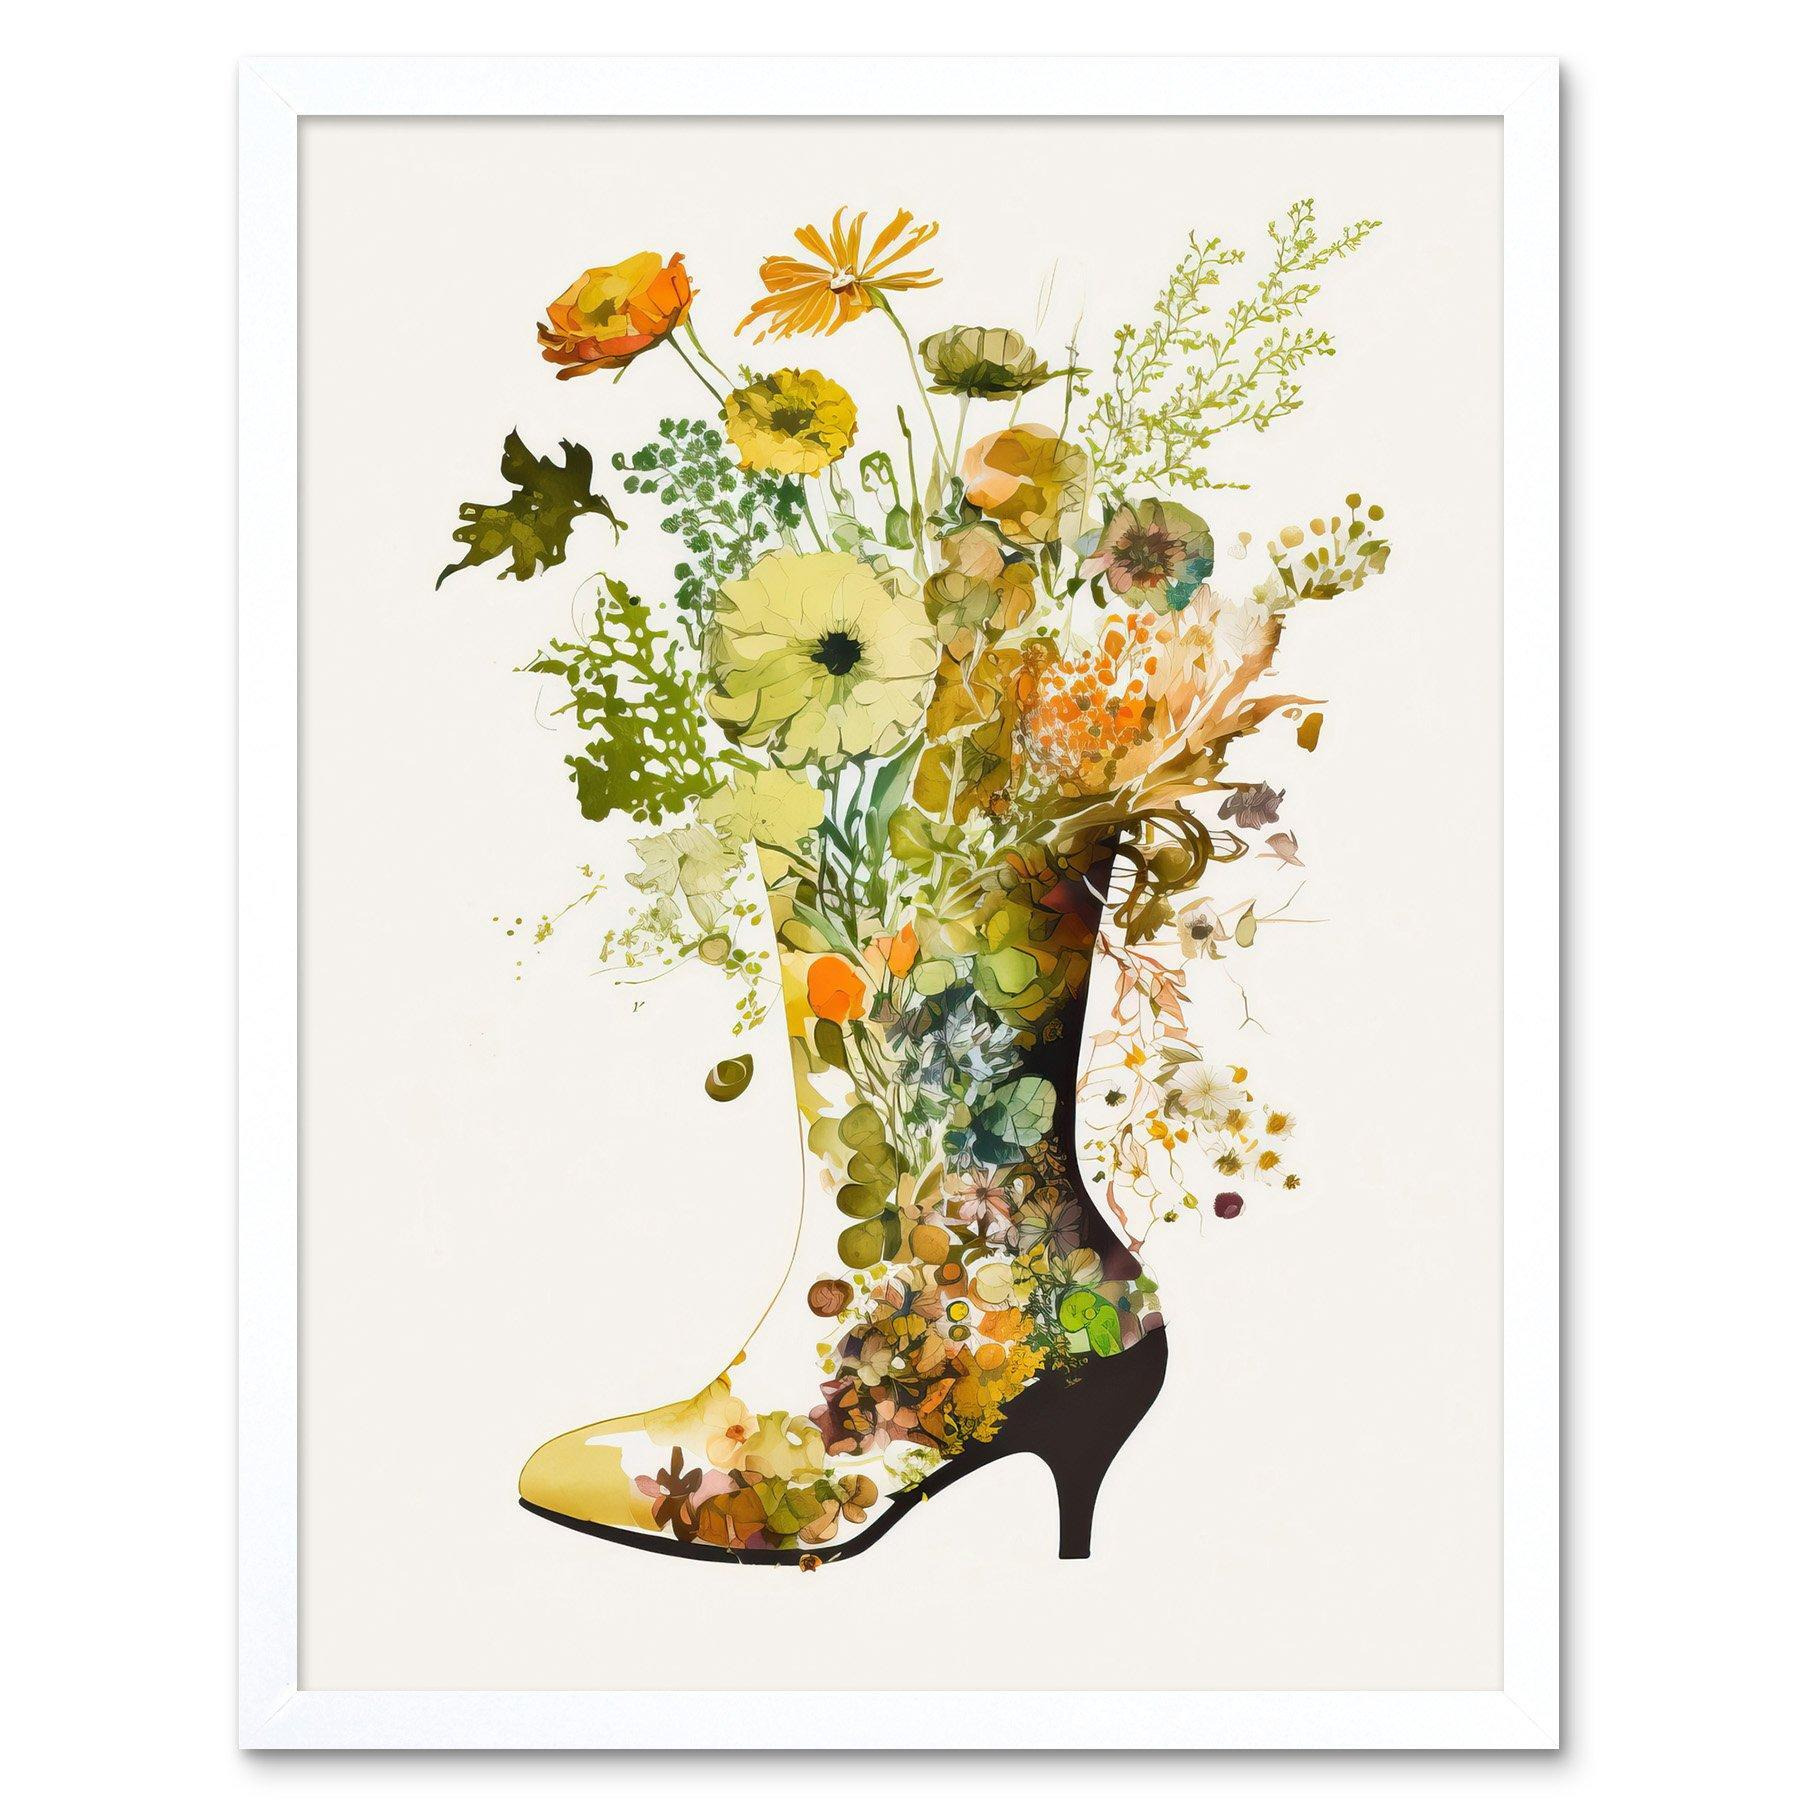 Wildflower Bouquet in High Heel Boot Glass Vase Art Print Framed Poster Wall Decor 12x16 inch - image 1